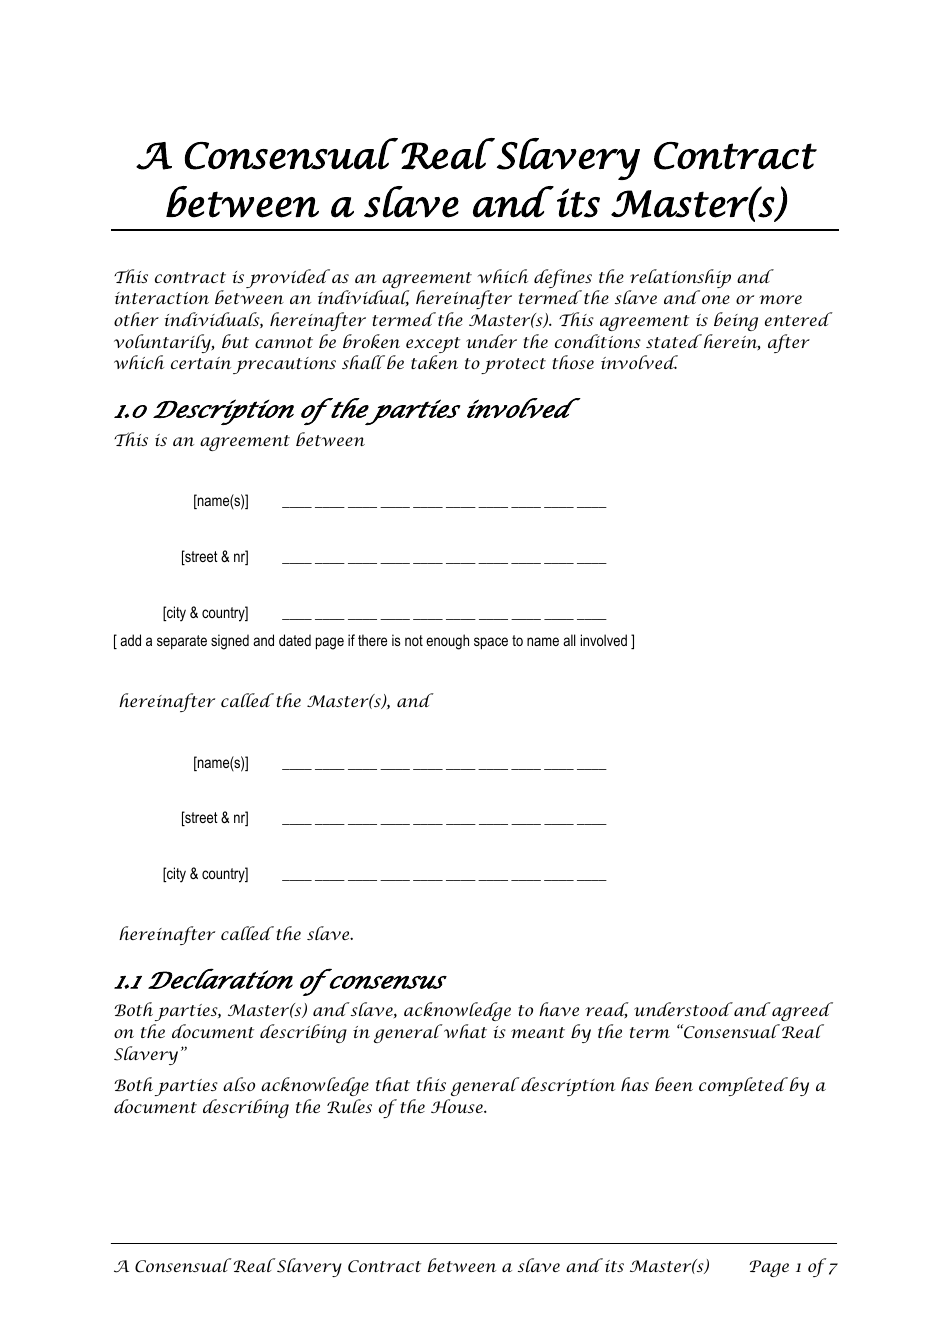 Master Slave Consensual Real Slavery Contract Template Download Regarding pre contract deposit agreement template